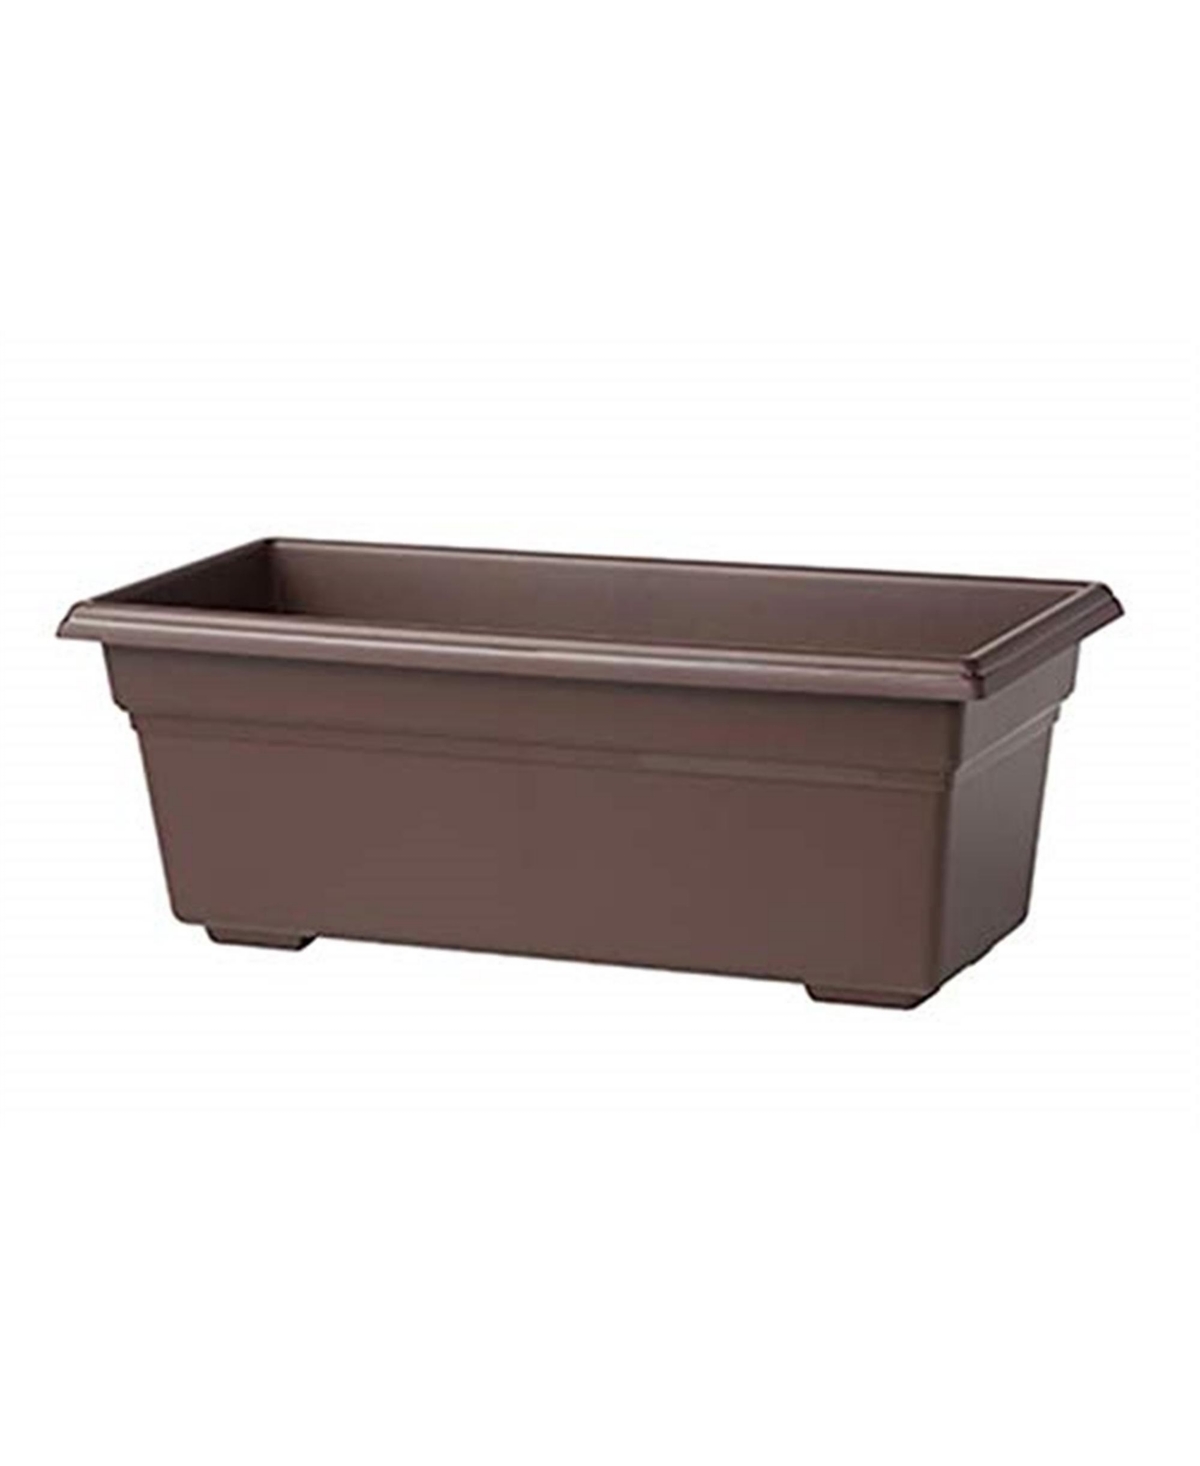 Countryside Flower Box, Brown, 24 Inch - Brown